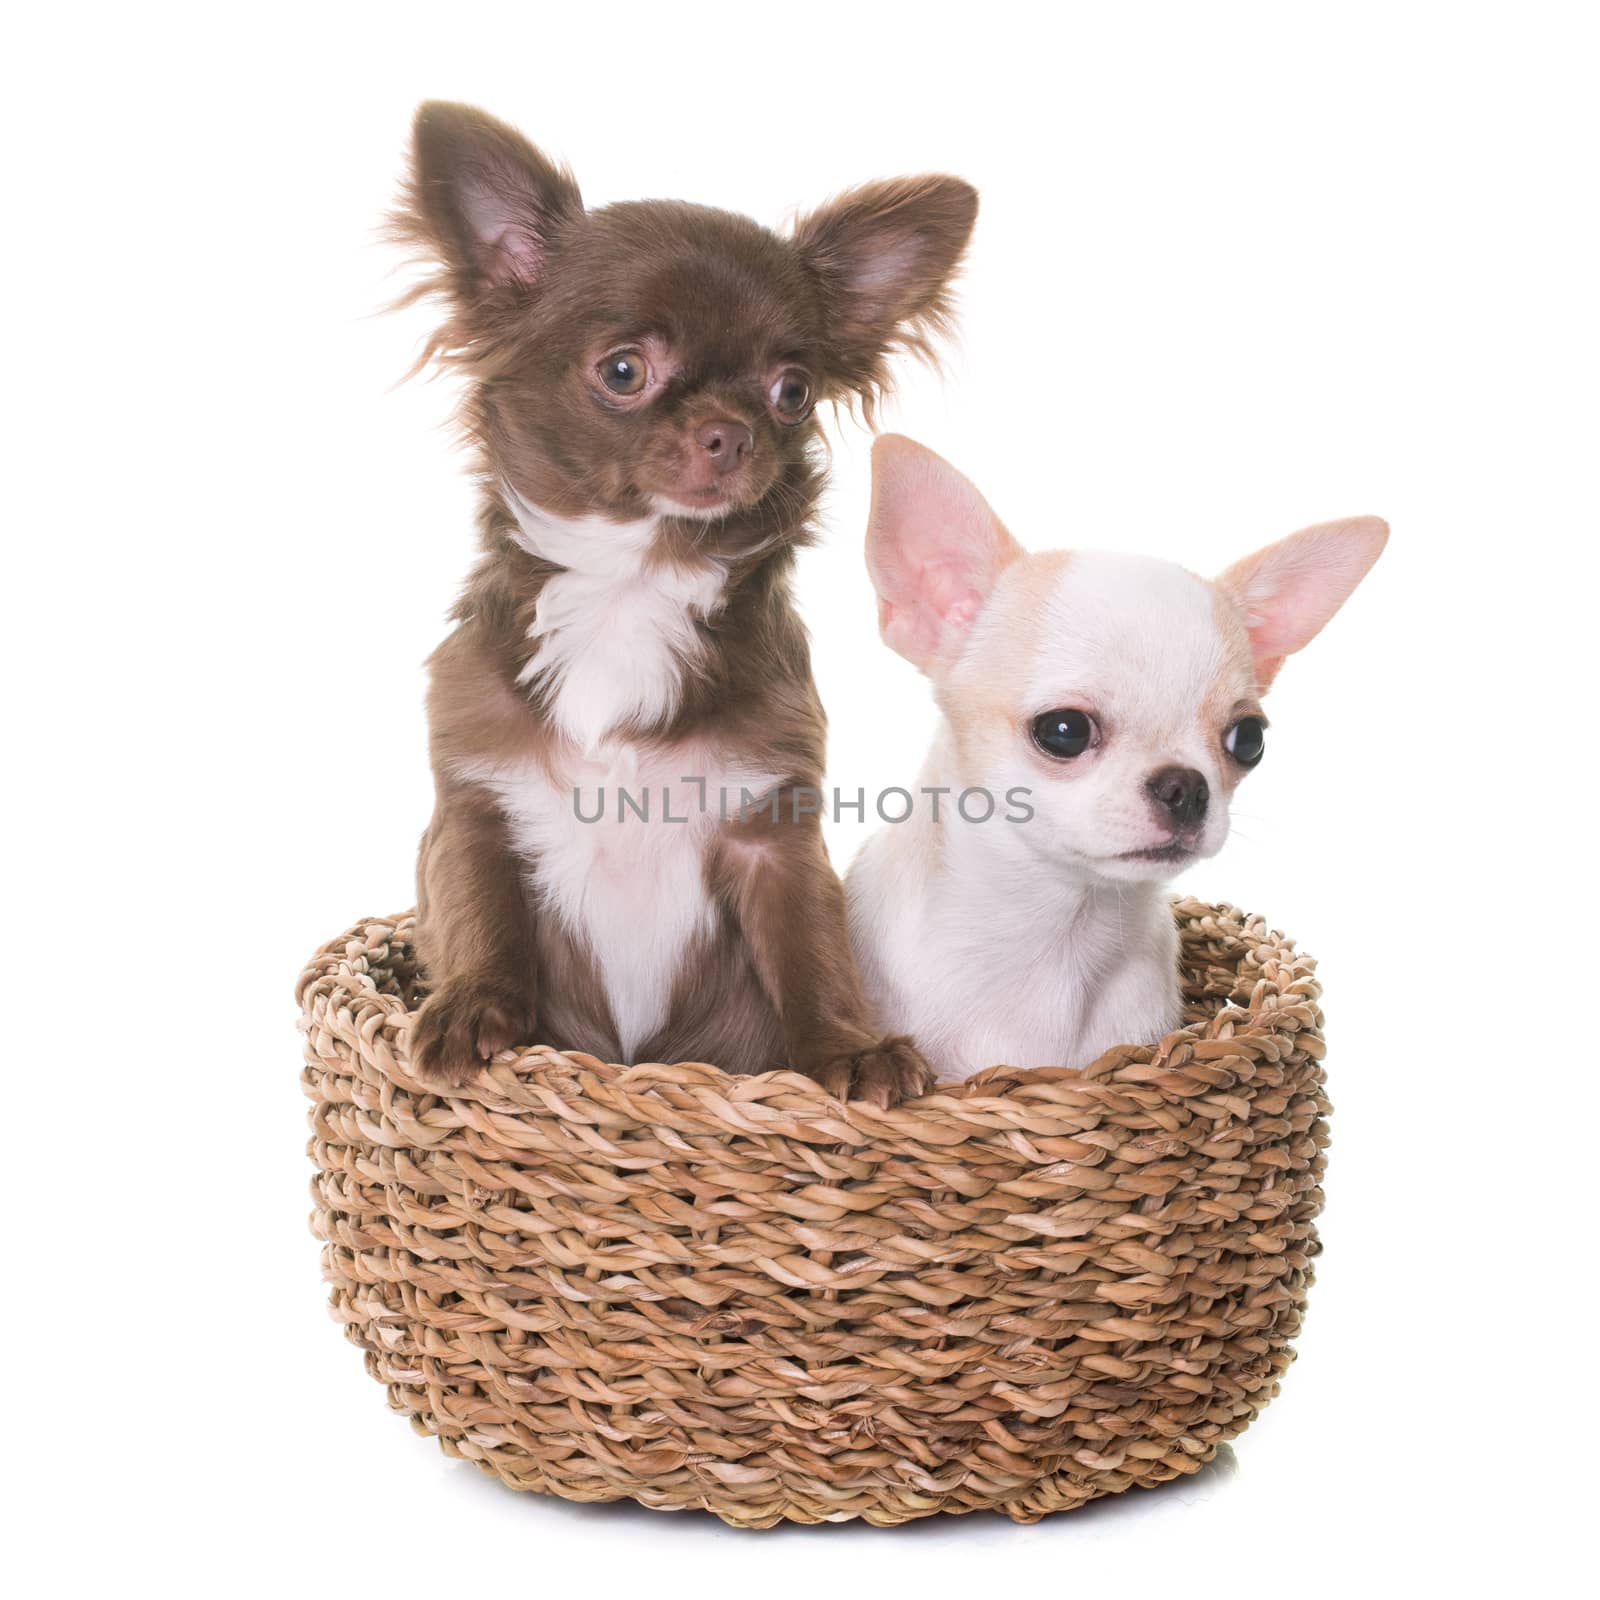 puppies chihuahua in studio by cynoclub